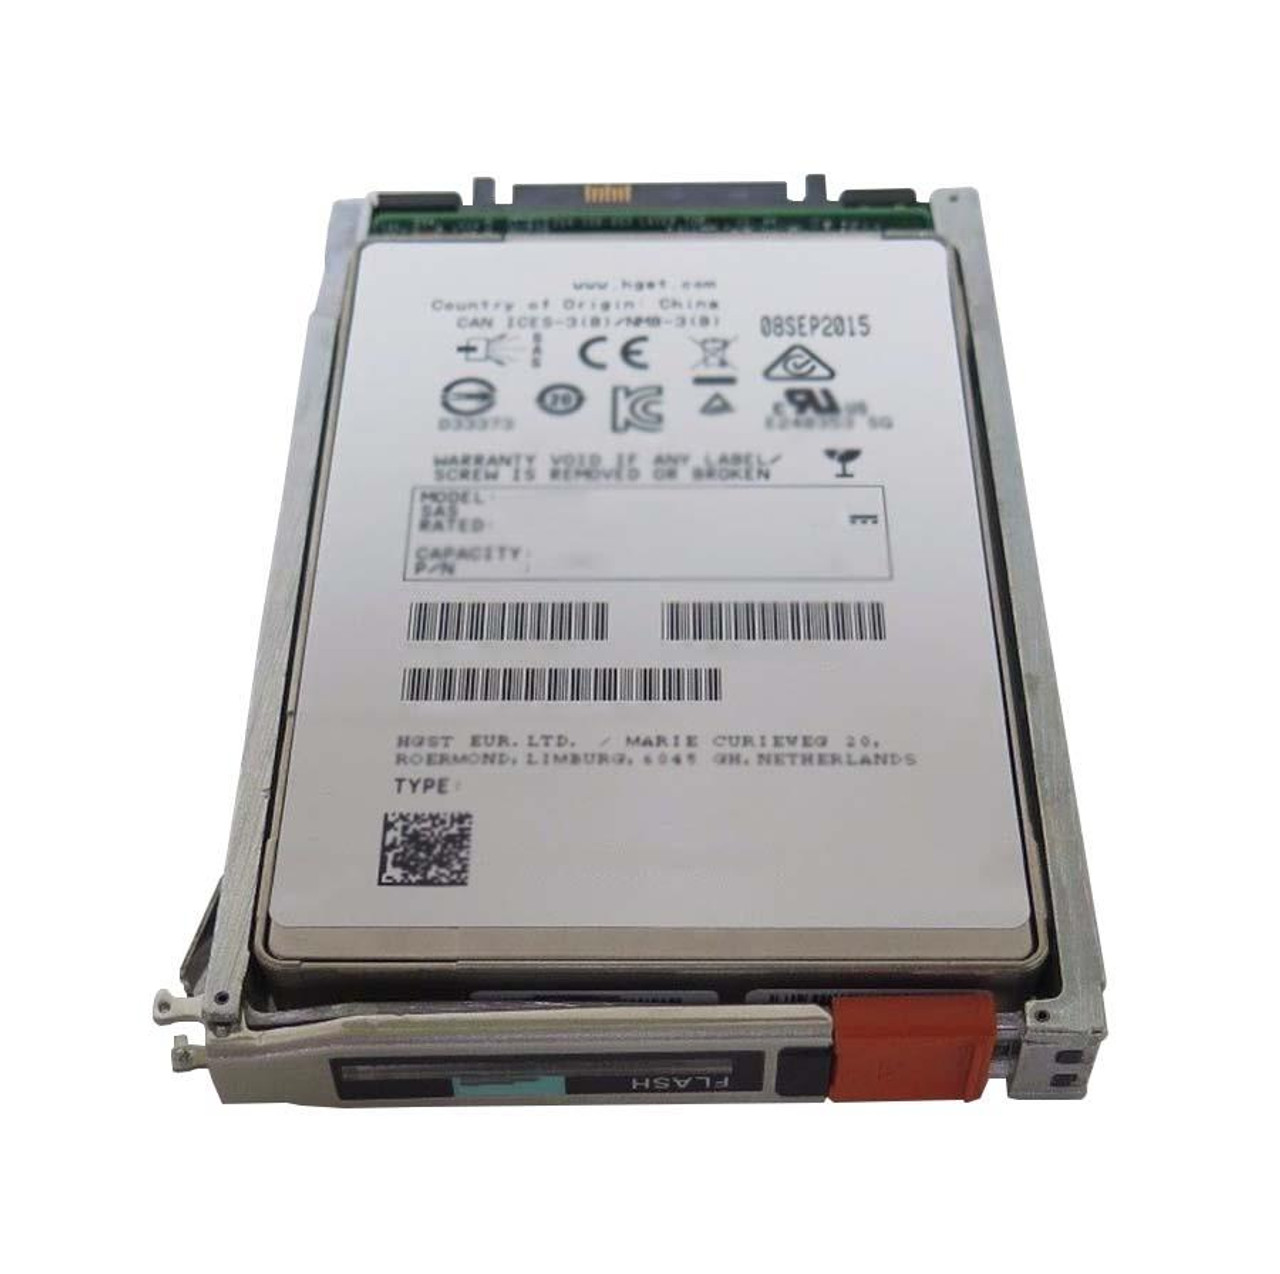 HL6FM2005BT1 EMC 200GB SAS 6Gbps 2.5-inch Internal Solid State Drive (SSD) with RAID5 (3+1 Configuration) for VMAX 400K